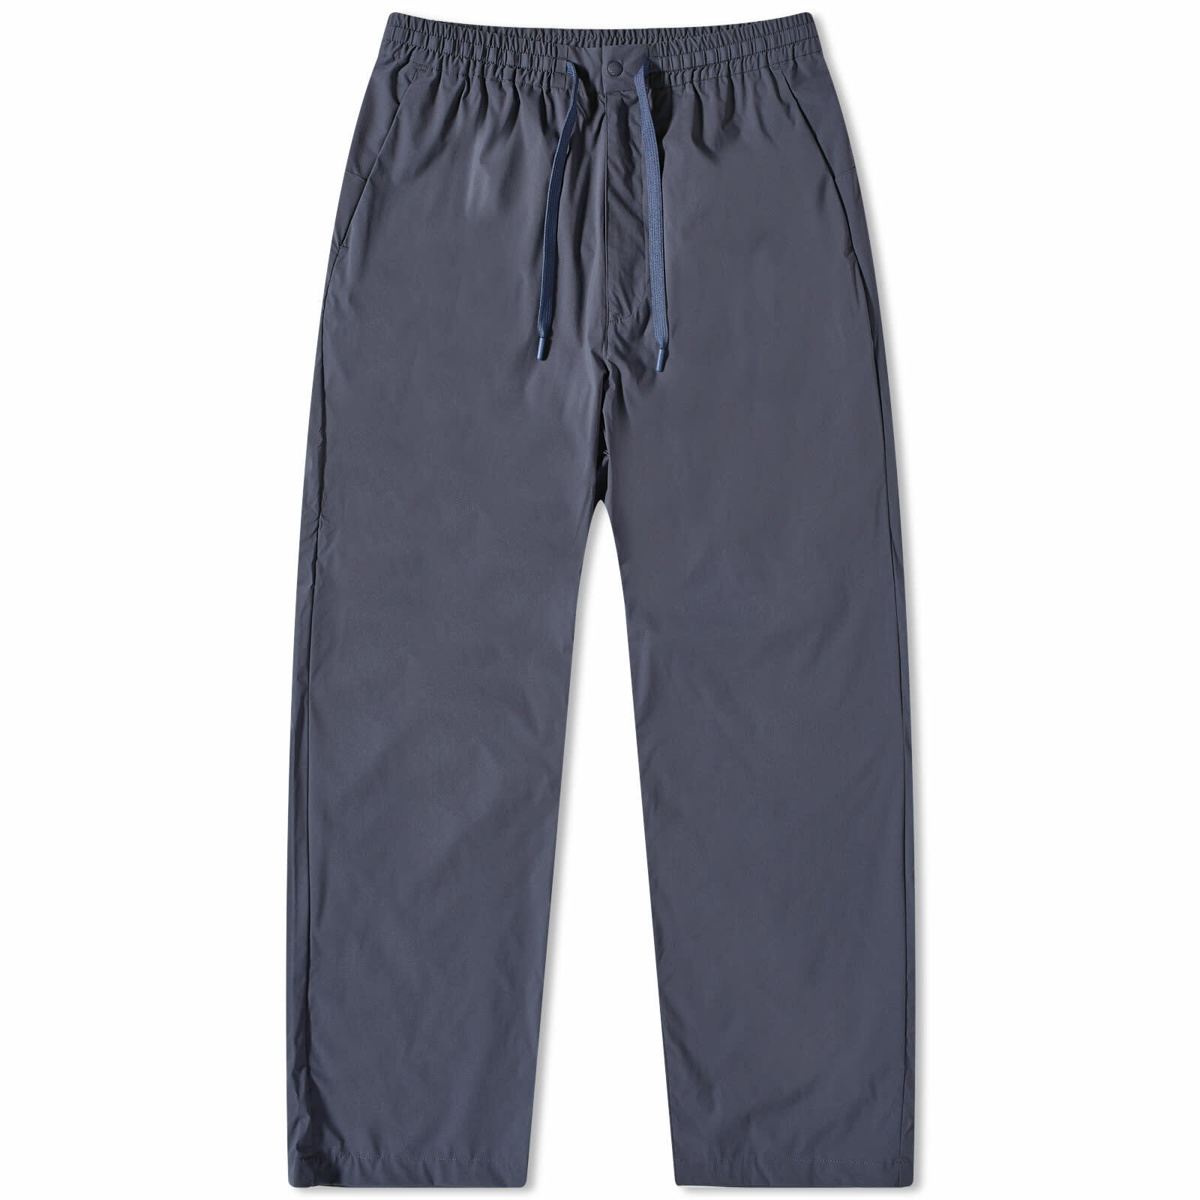 Rapha x Snow Peak DWR Light Trousers in India Ink Rapha